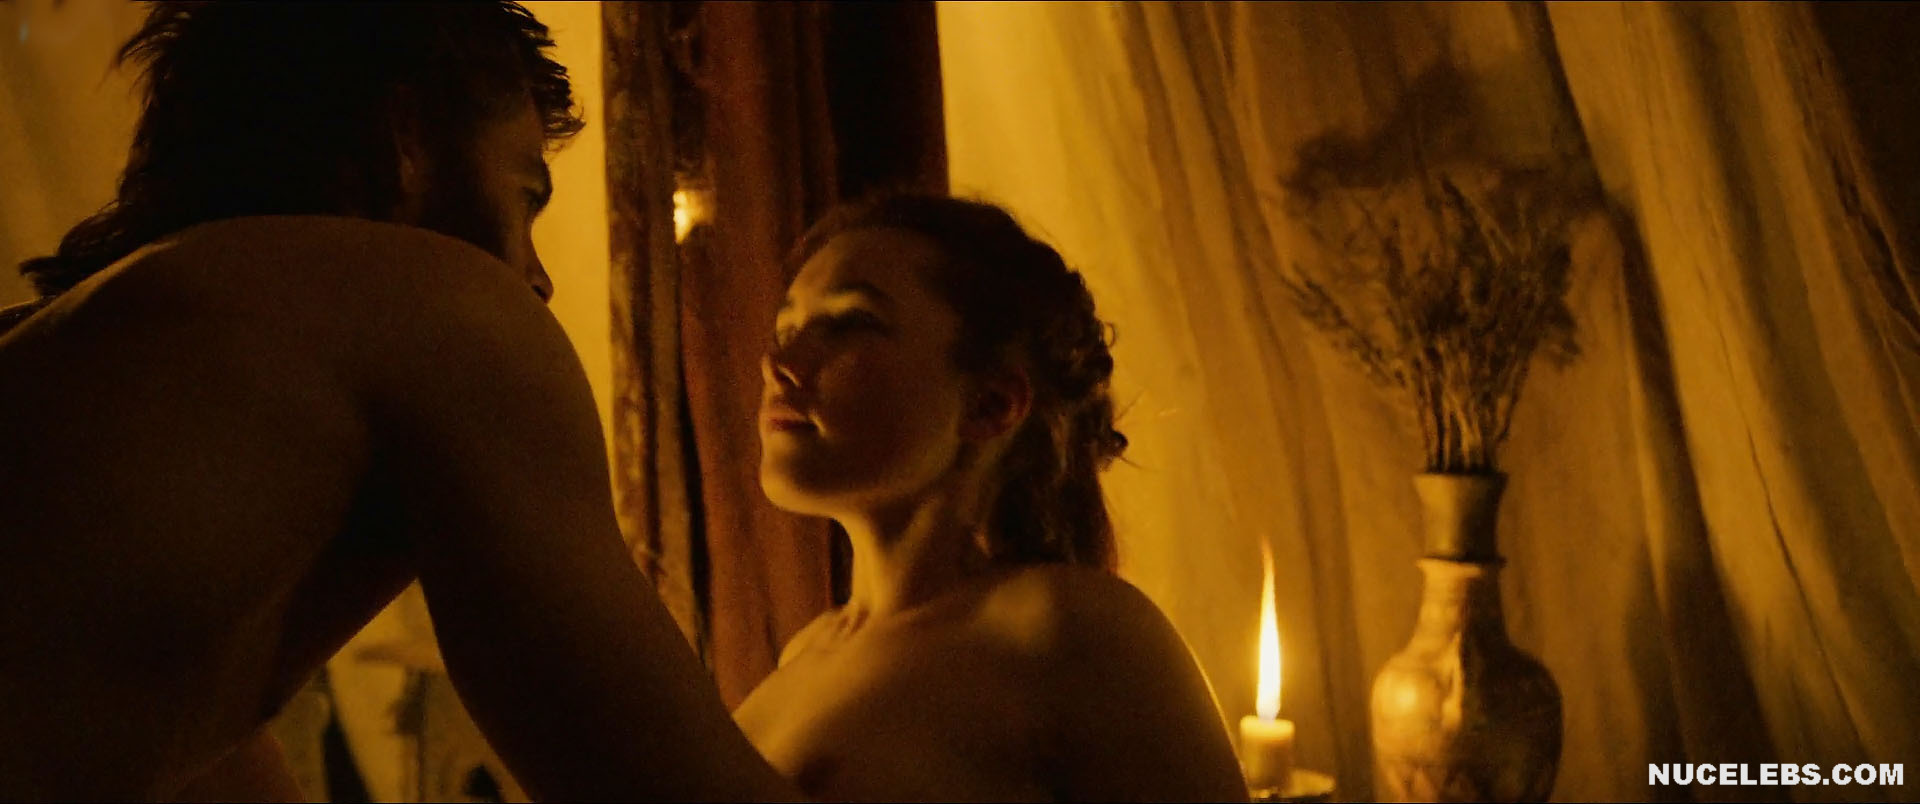 Hot babe Florence Pugh will impress you with her nude boobies in Outlaw Kin...